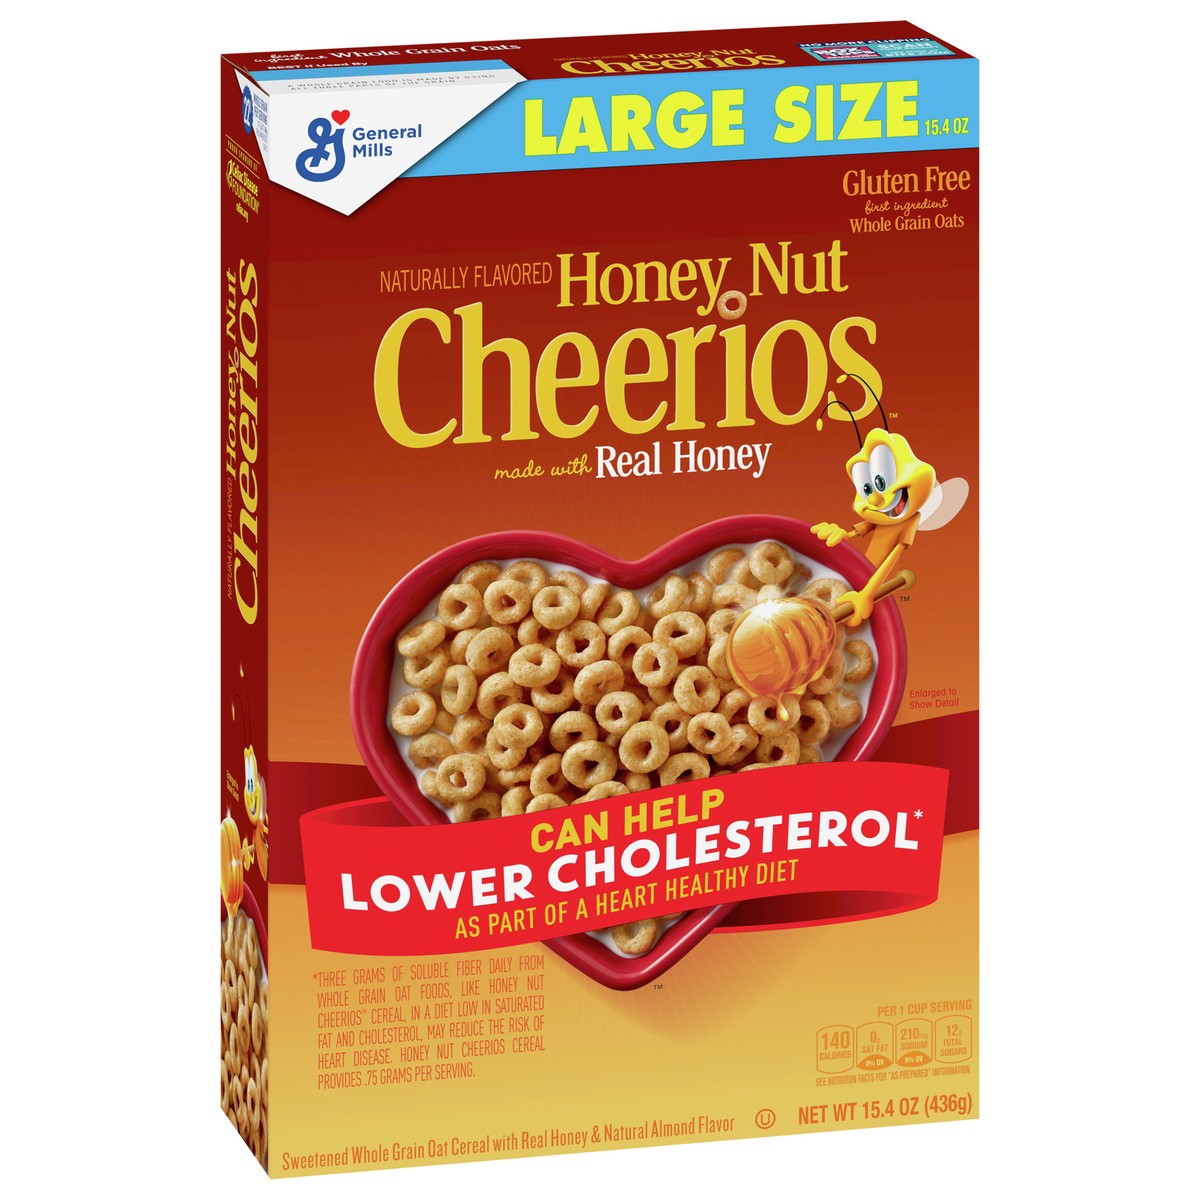 slide 4 of 9, Cheerios Honey Nut Cheerios Cereal, Limited Edition Happy Heart Shapes, Heart Healthy Cereal With Whole Grain Oats, Large Size, 15.4 oz, 15.4 oz